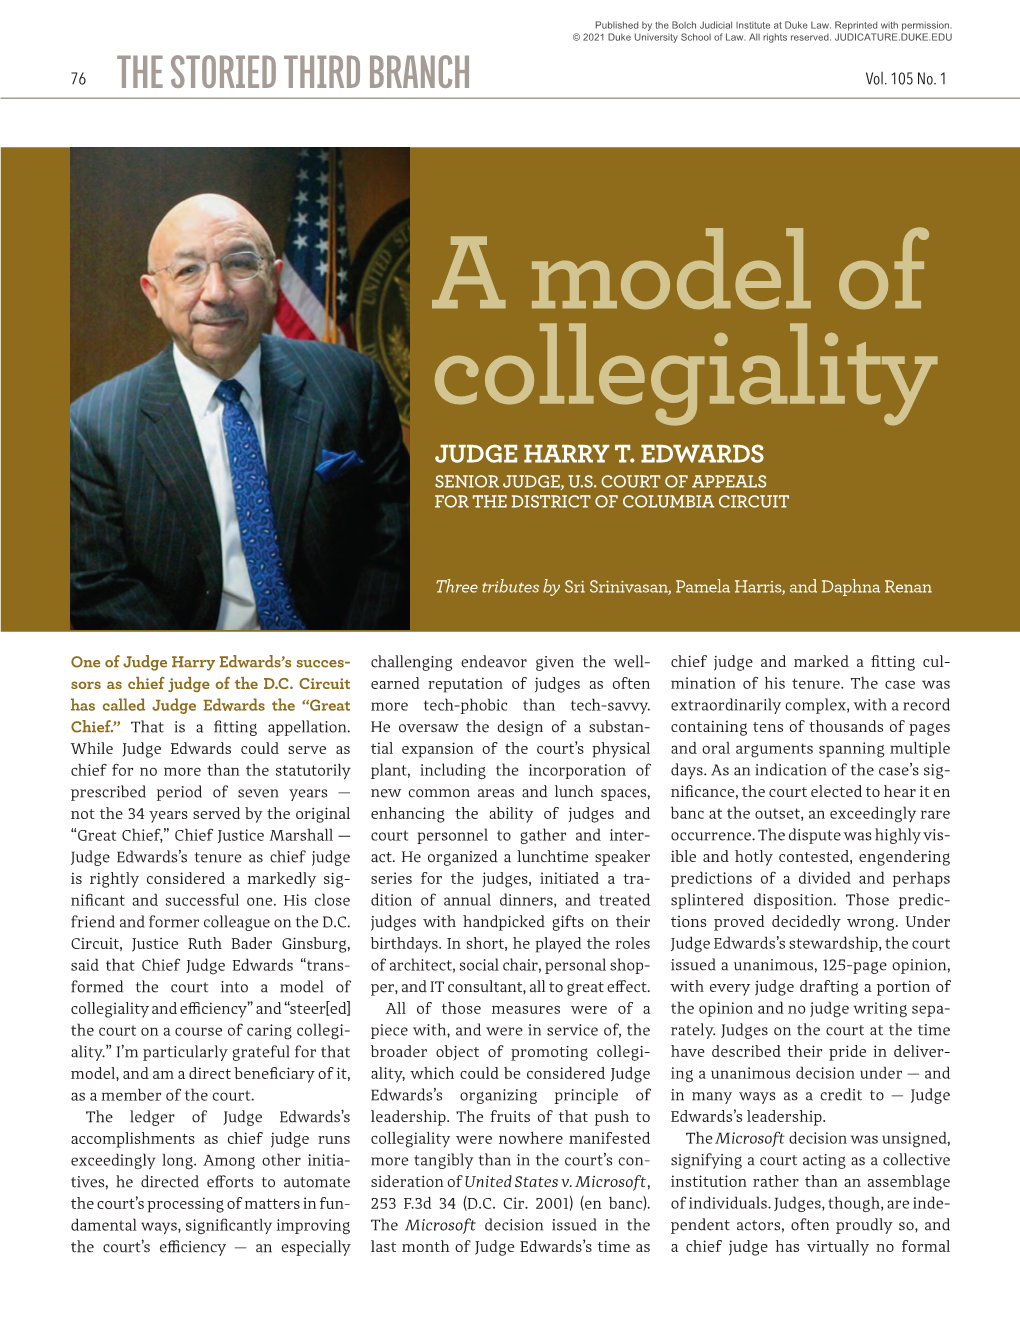 A Model of Collegiality: Judge Harry T. Edwards